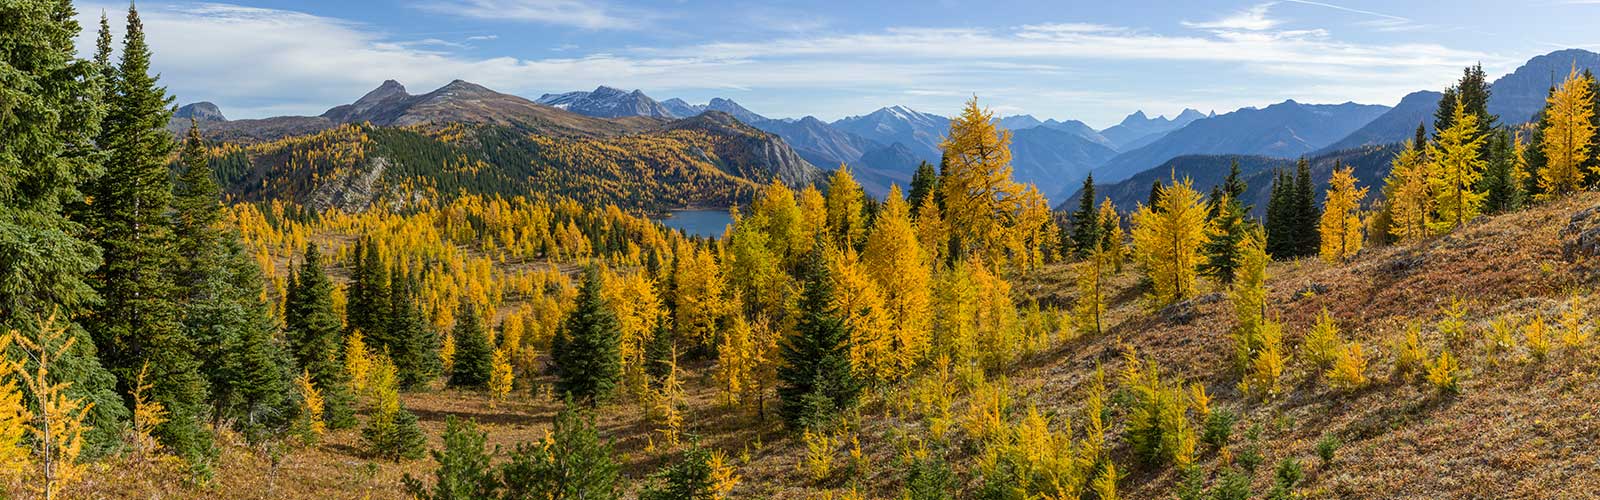 Moutain range in Banff National Park's Sunshine Meadows featuring the yellow larches in fall